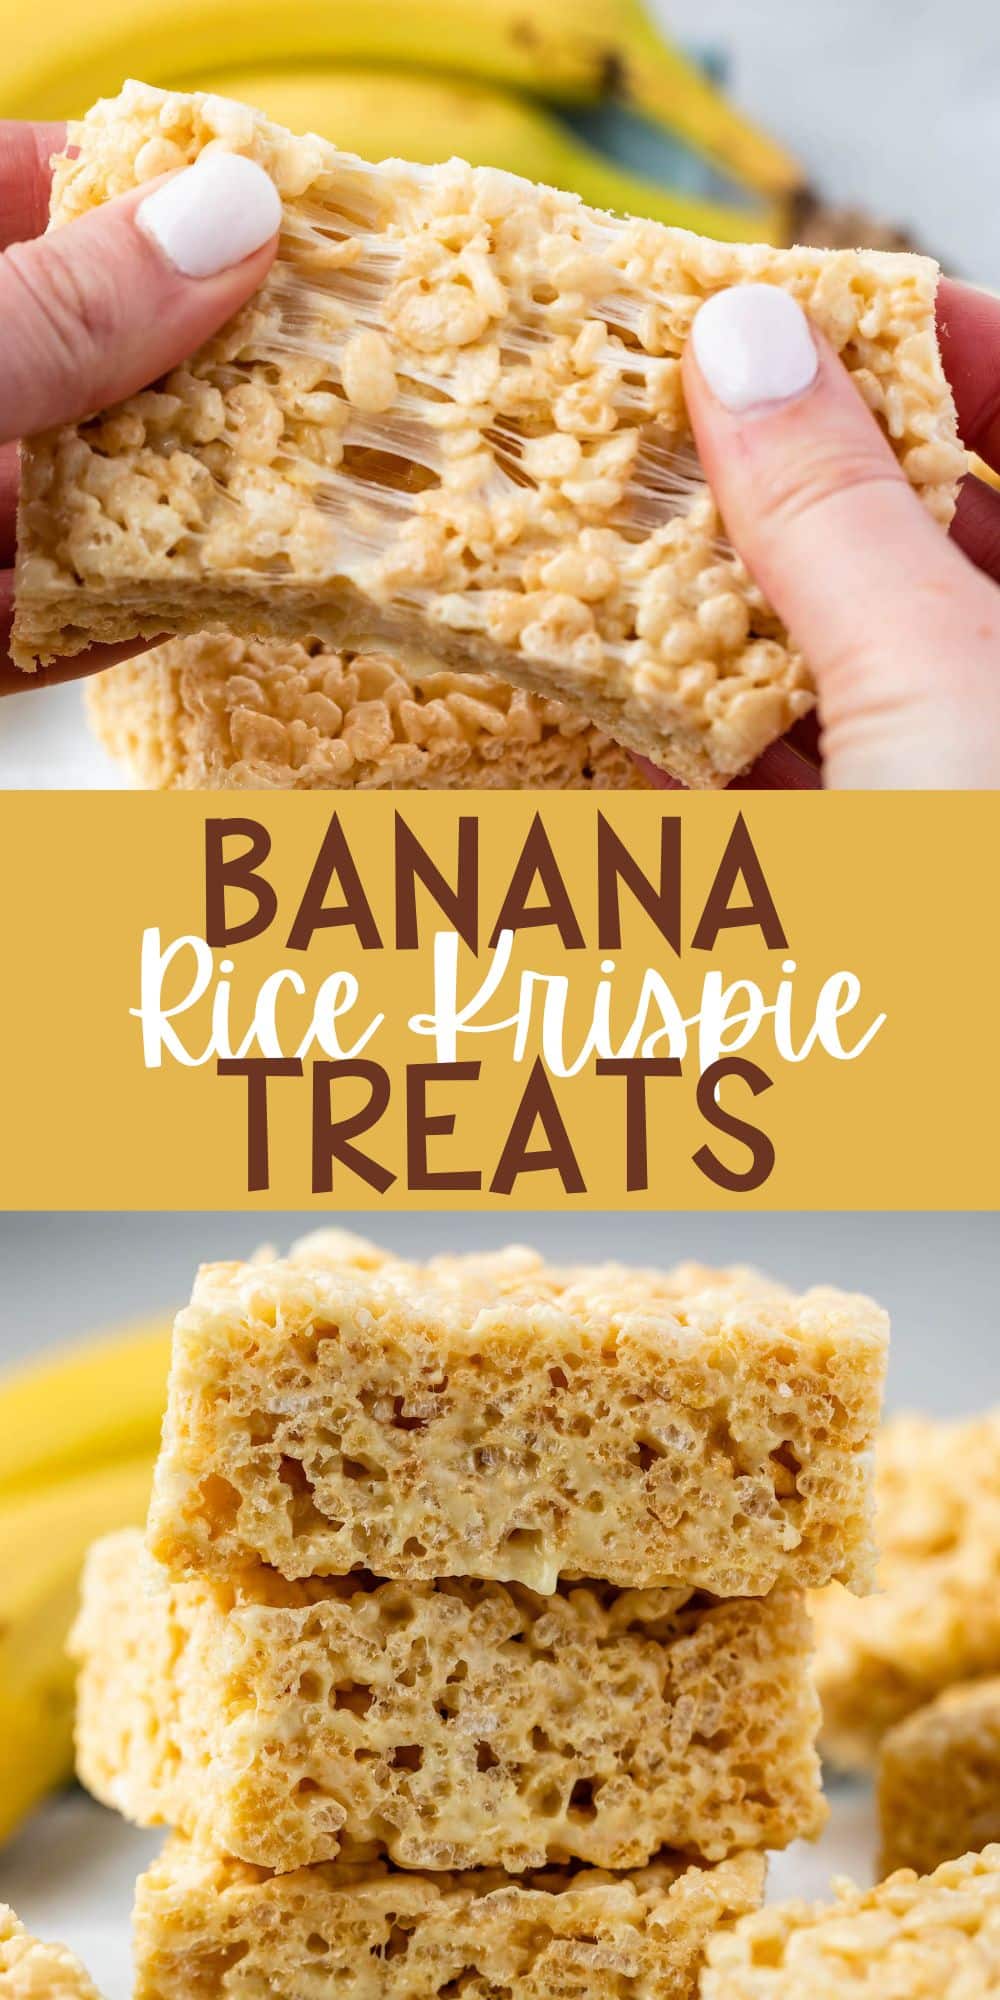 two images of Rice Krispie Treats being torn apart with two hands and with a banana in the background with words on the image.